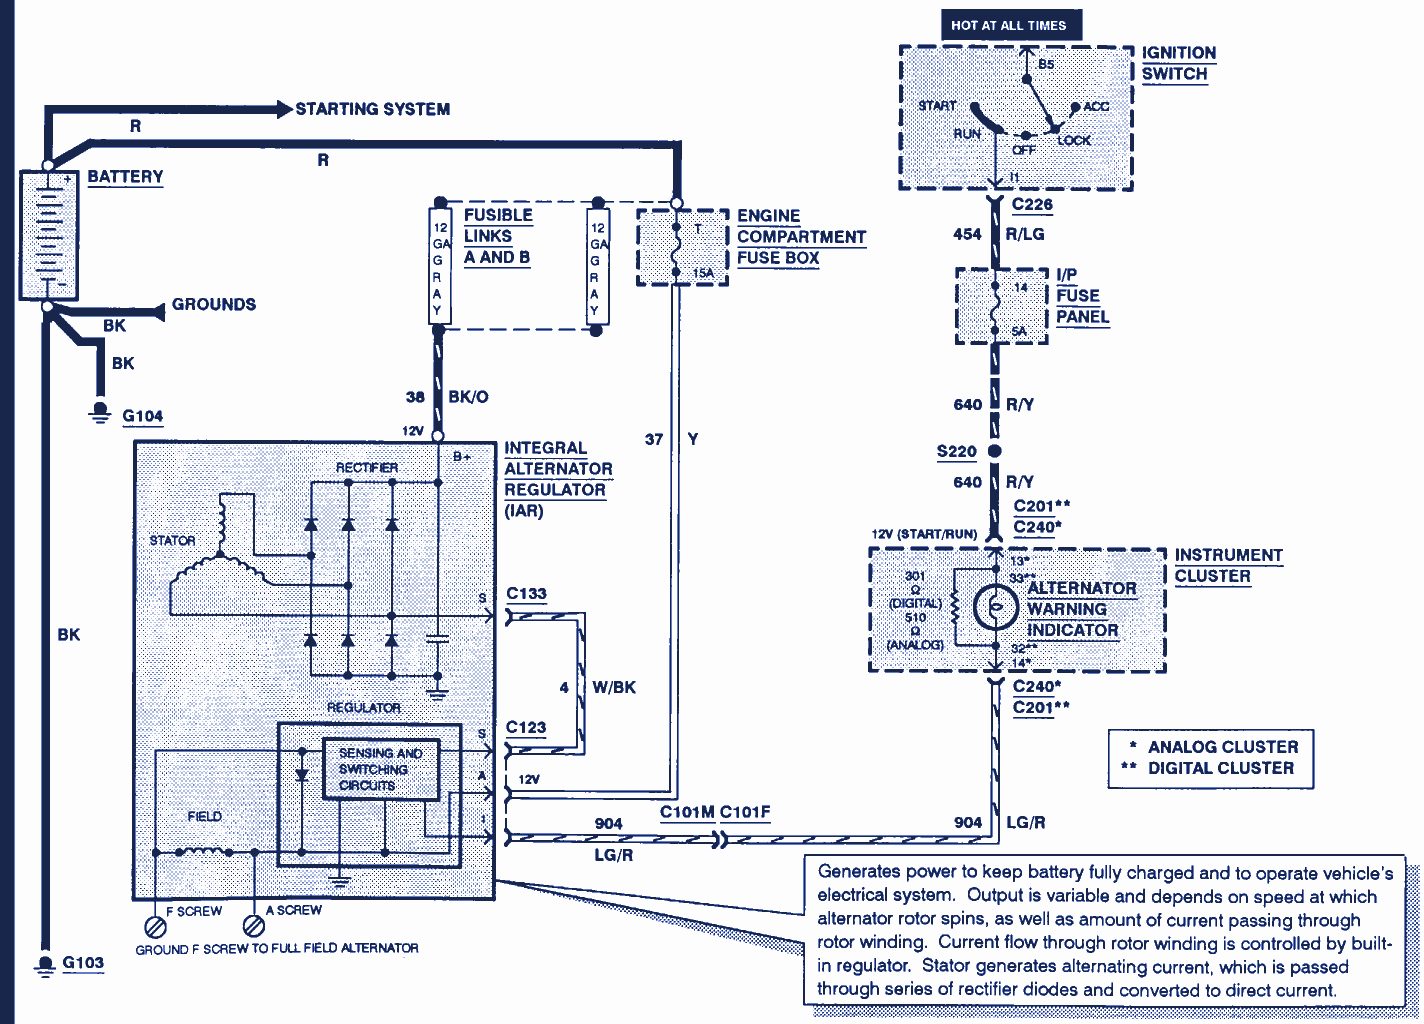 2005 Ford Expedition Radio Wiring Diagram from 3.bp.blogspot.com